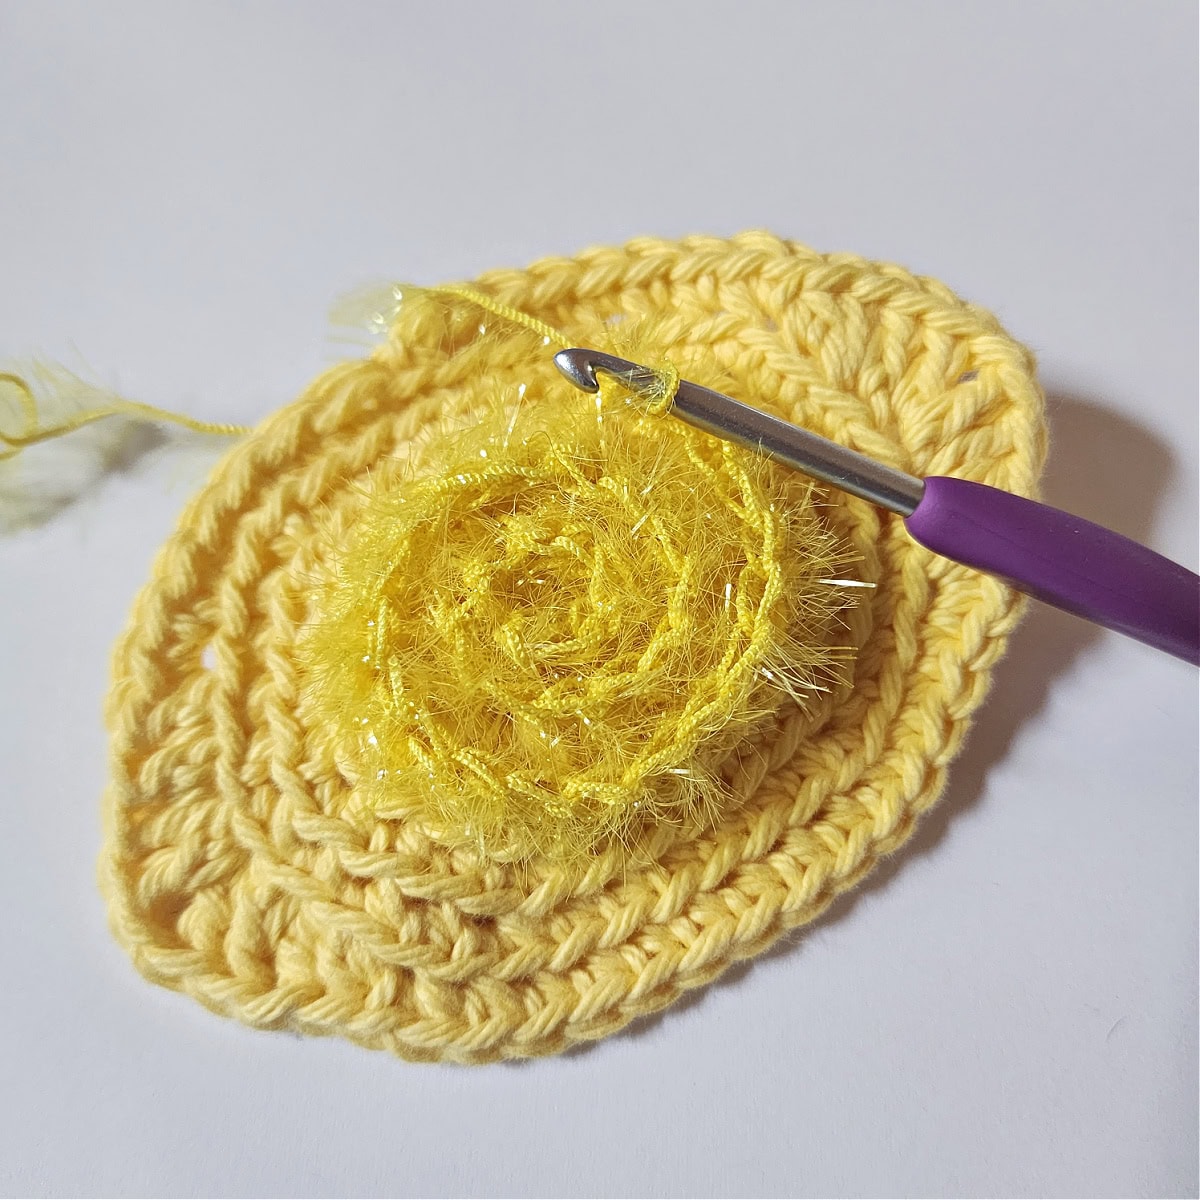 Crochet hook with scrubby sparkle yarn being added in a circle to a crochet lemon dish scrubby.